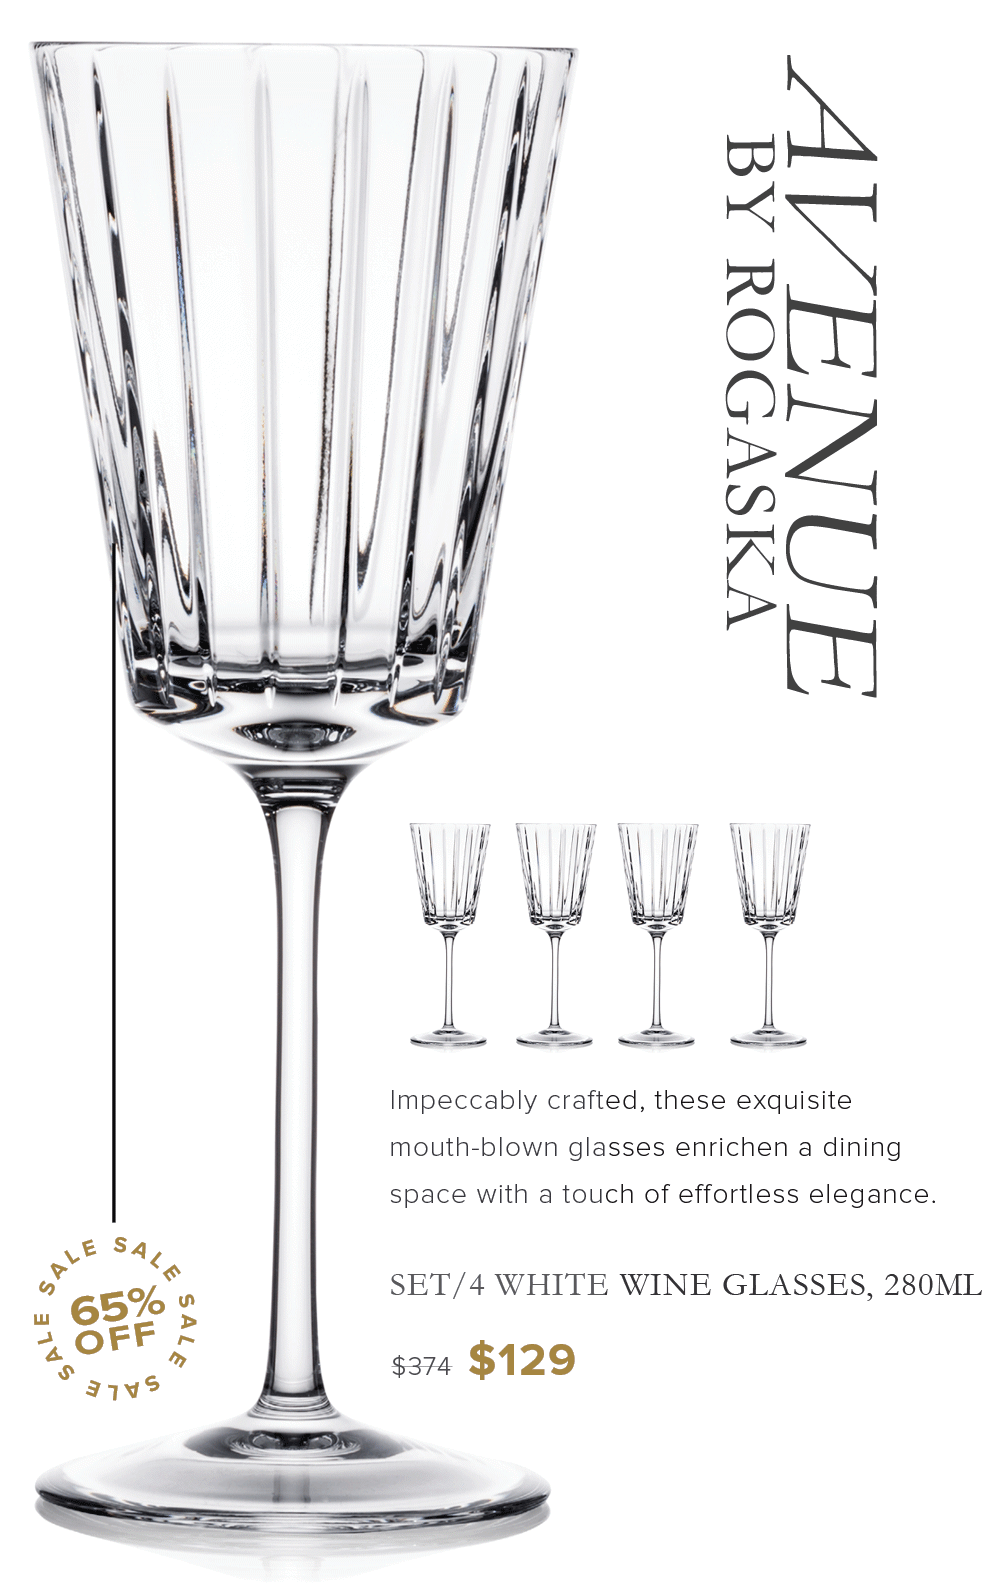 V2ASVOOYU Ad HINHAAY Impeccably crafted, these exquisite mouth-blown glasses enrichen a dining space with a touch of effortless elegance. Sa, lnv. SET4 WHITE WINE GLASSES, 280ML w 65% % A OFF a s374 $129 31v 